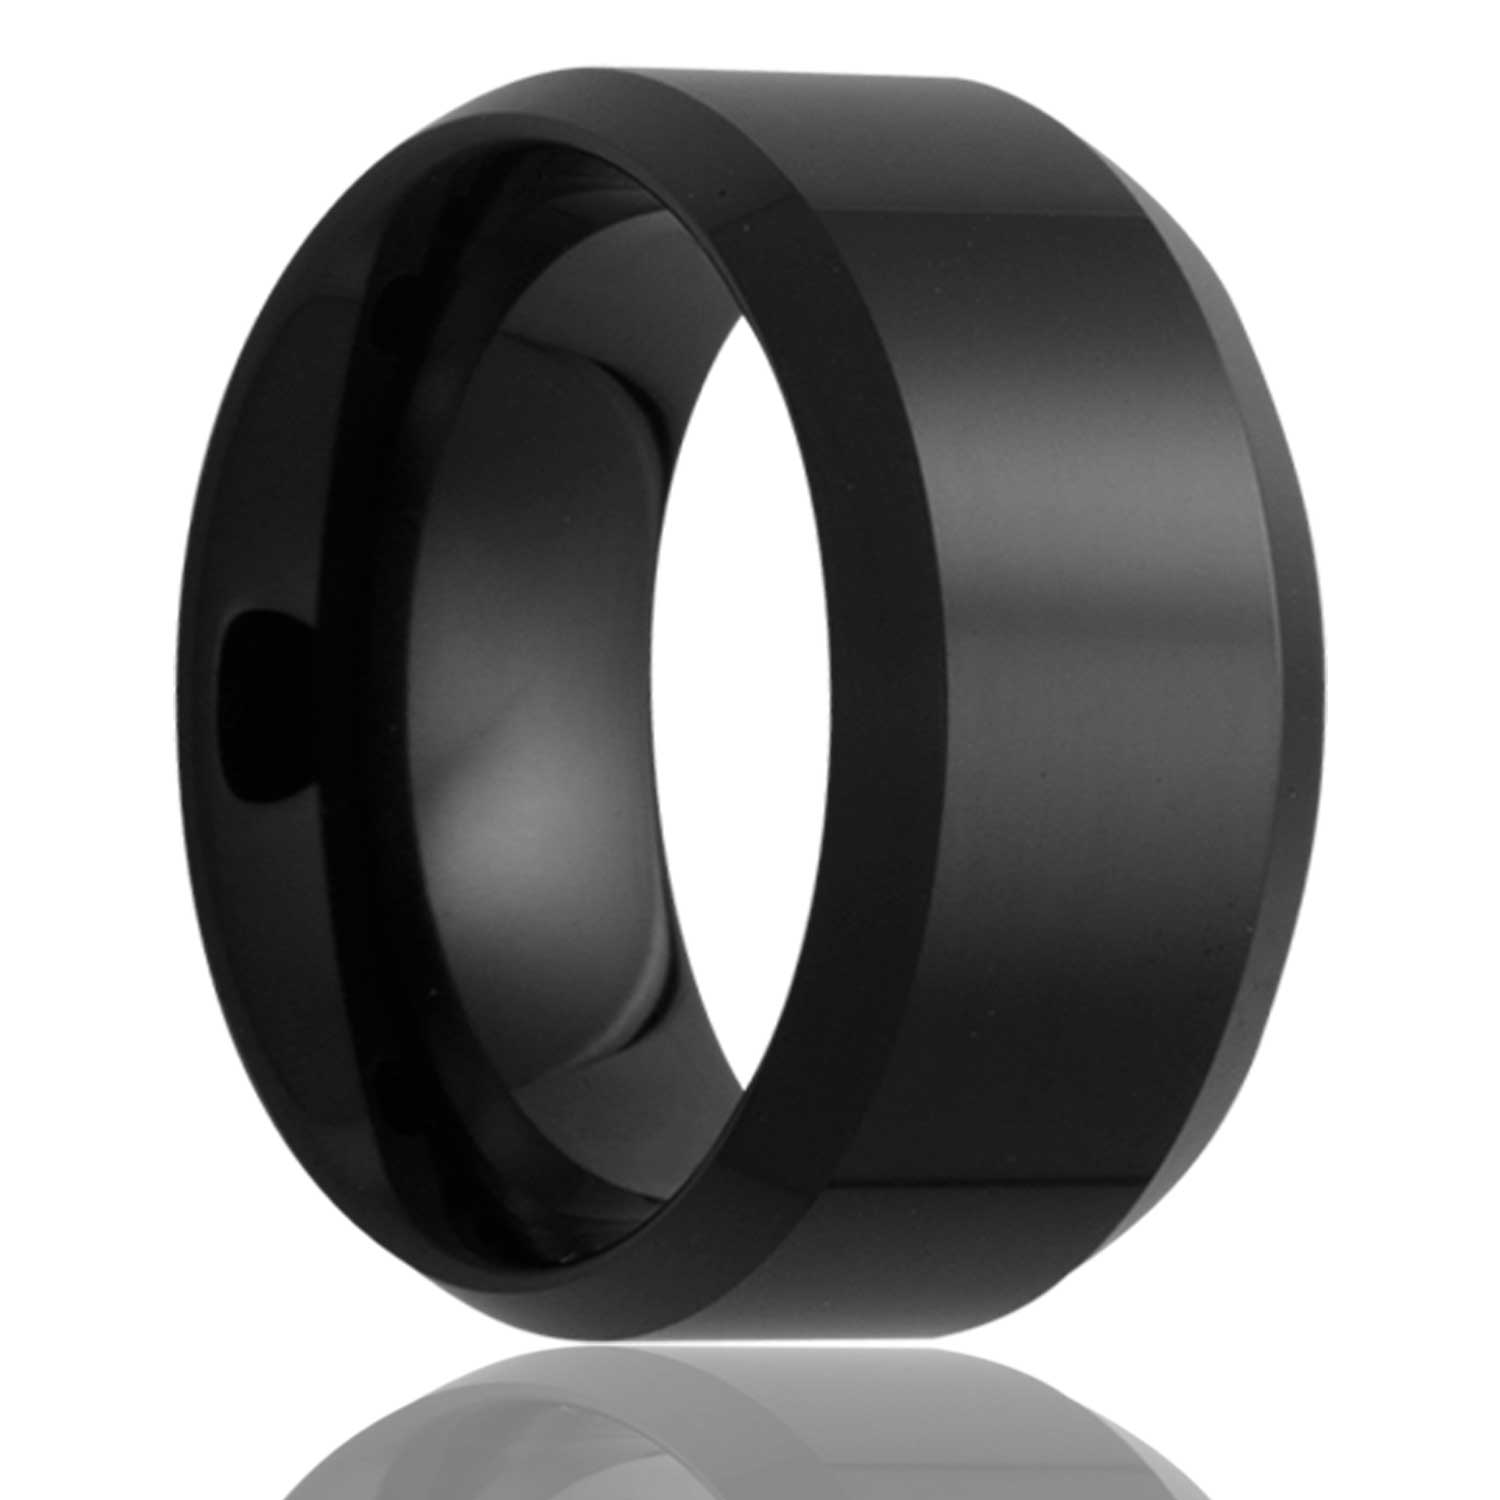 A black ceramic wedding band with beveled edges displayed on a neutral white background.